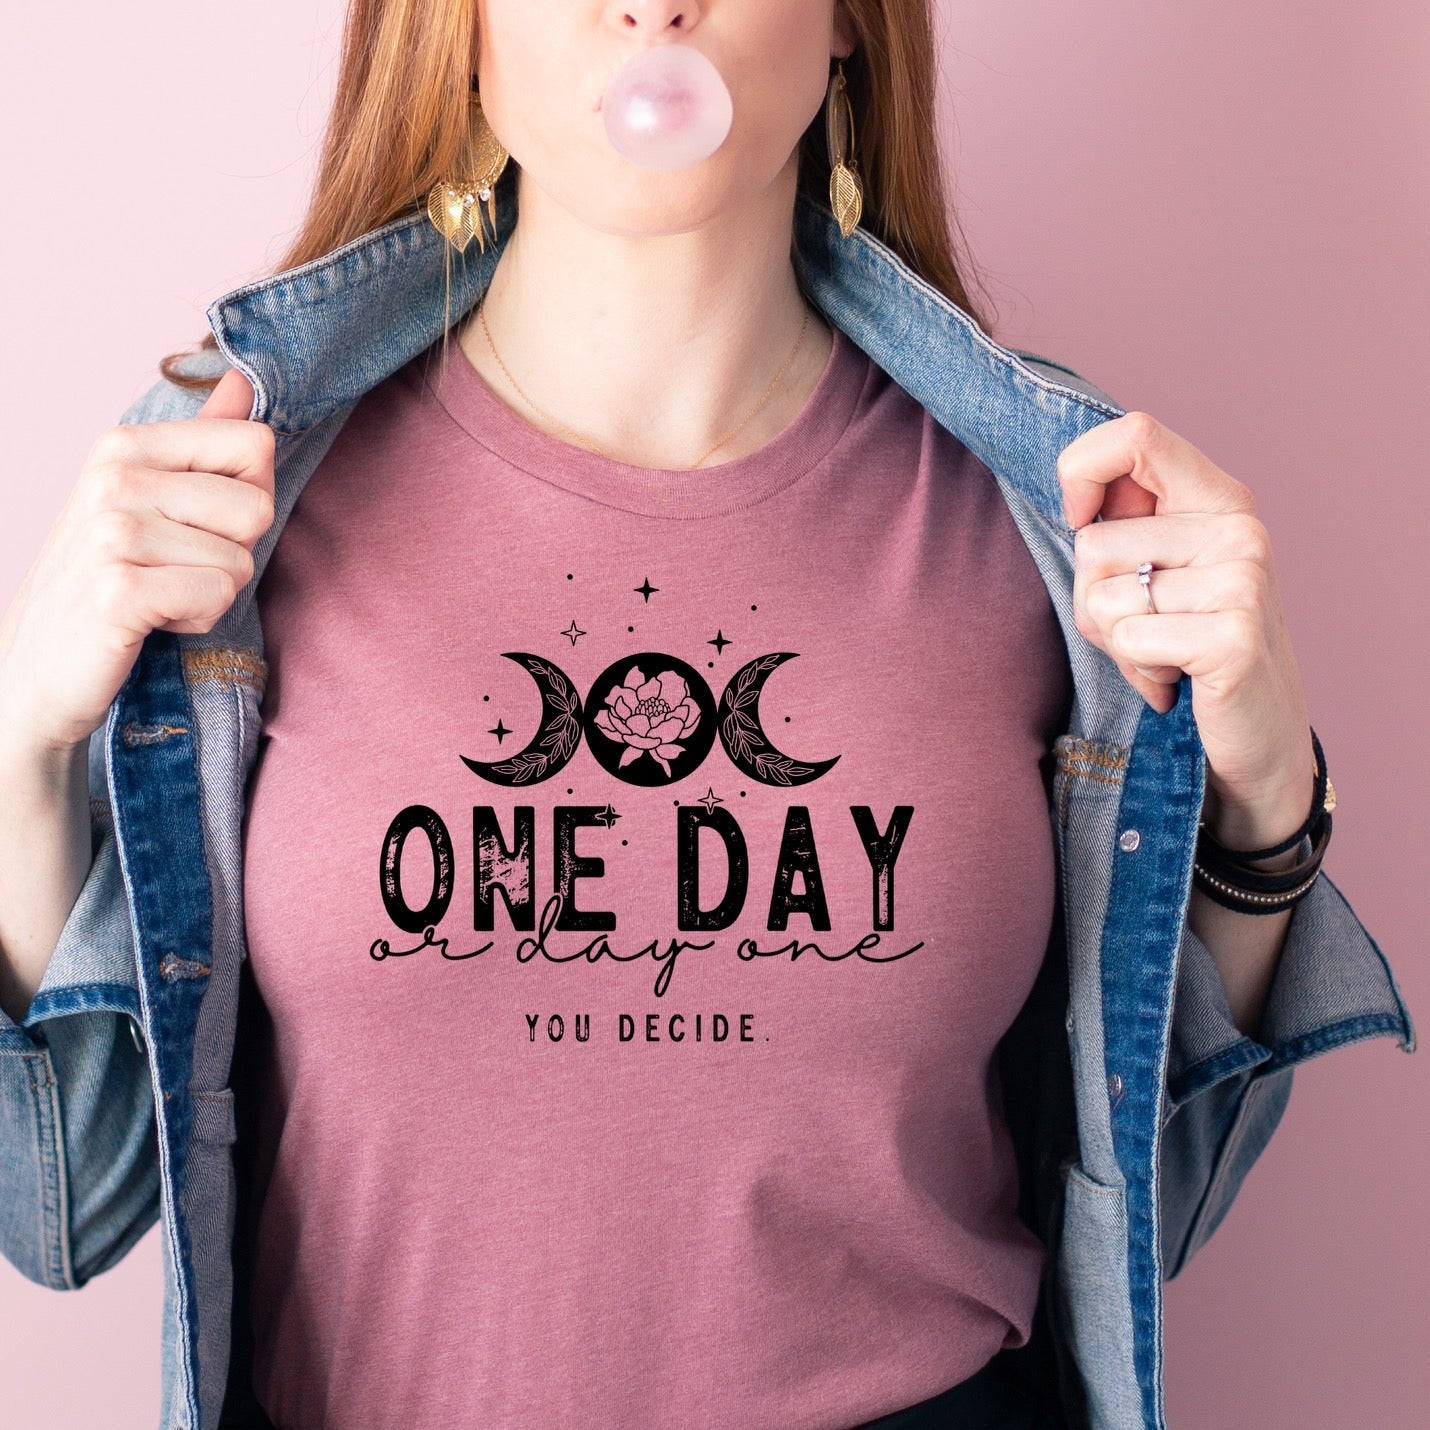 One Day Or Day One - You Decide (Bella Mauve Tee)